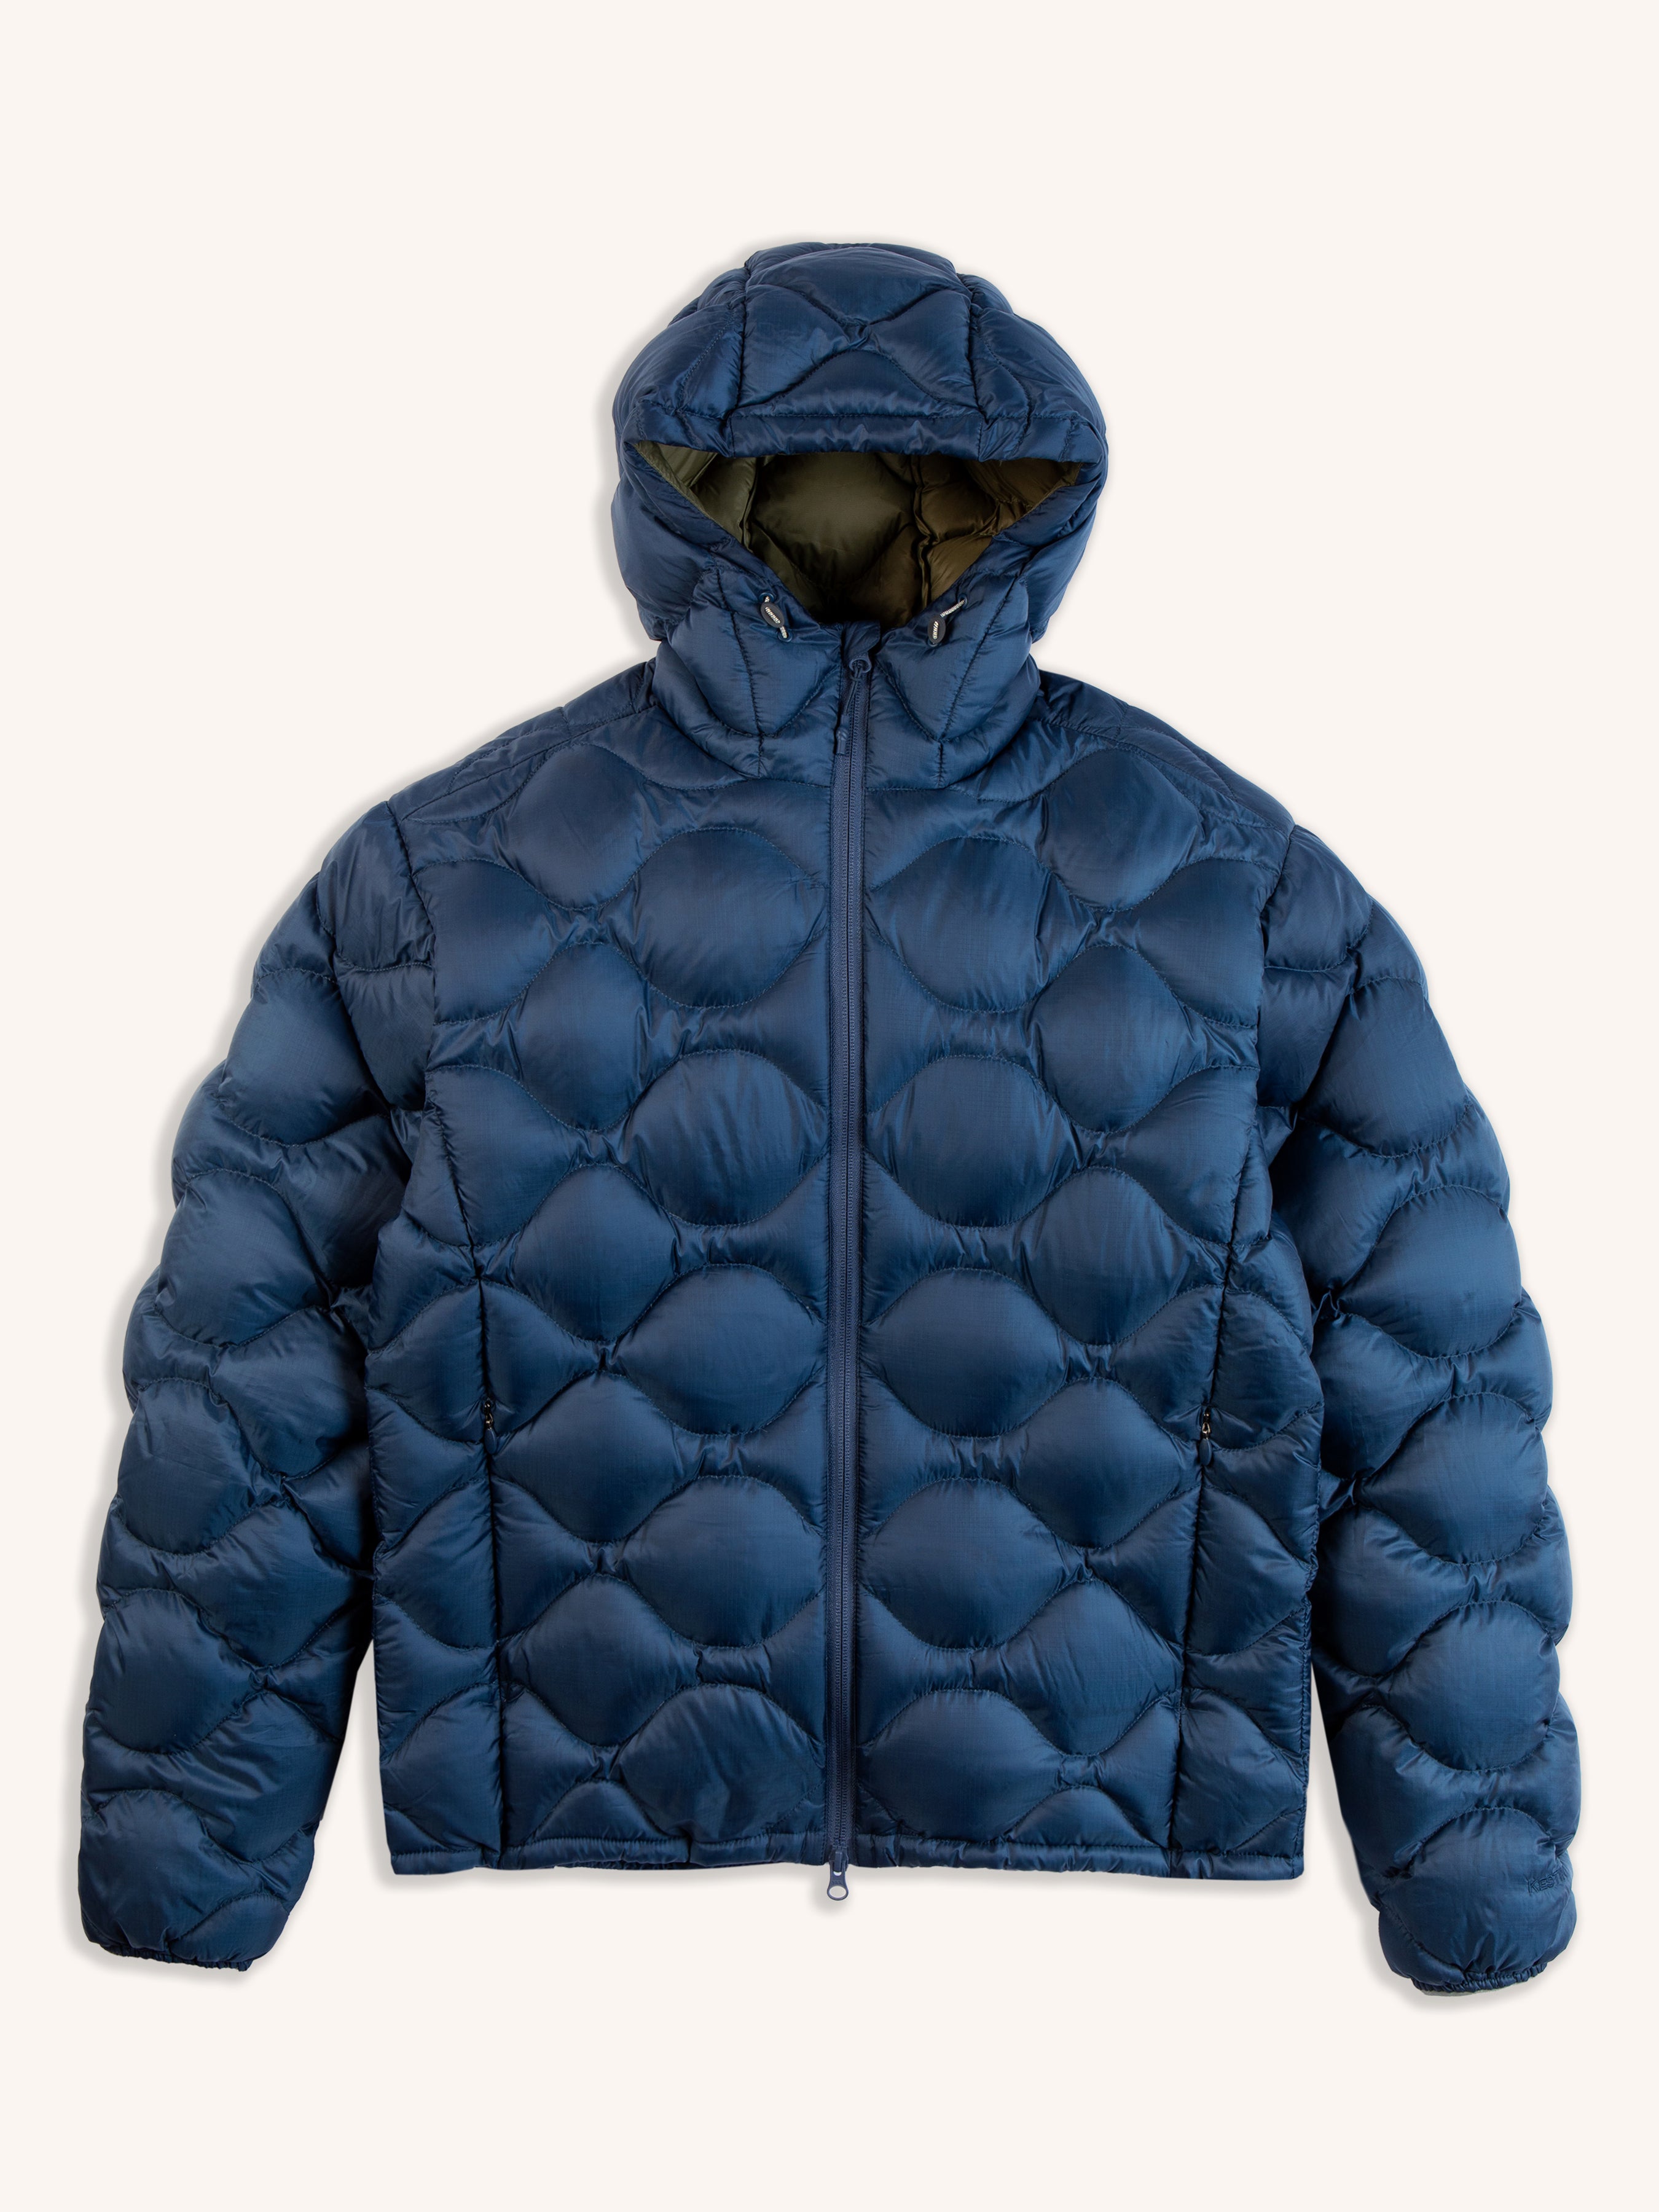 A quilted down jacket in petrol blue by men's clothing brand KESTIN on a white background.